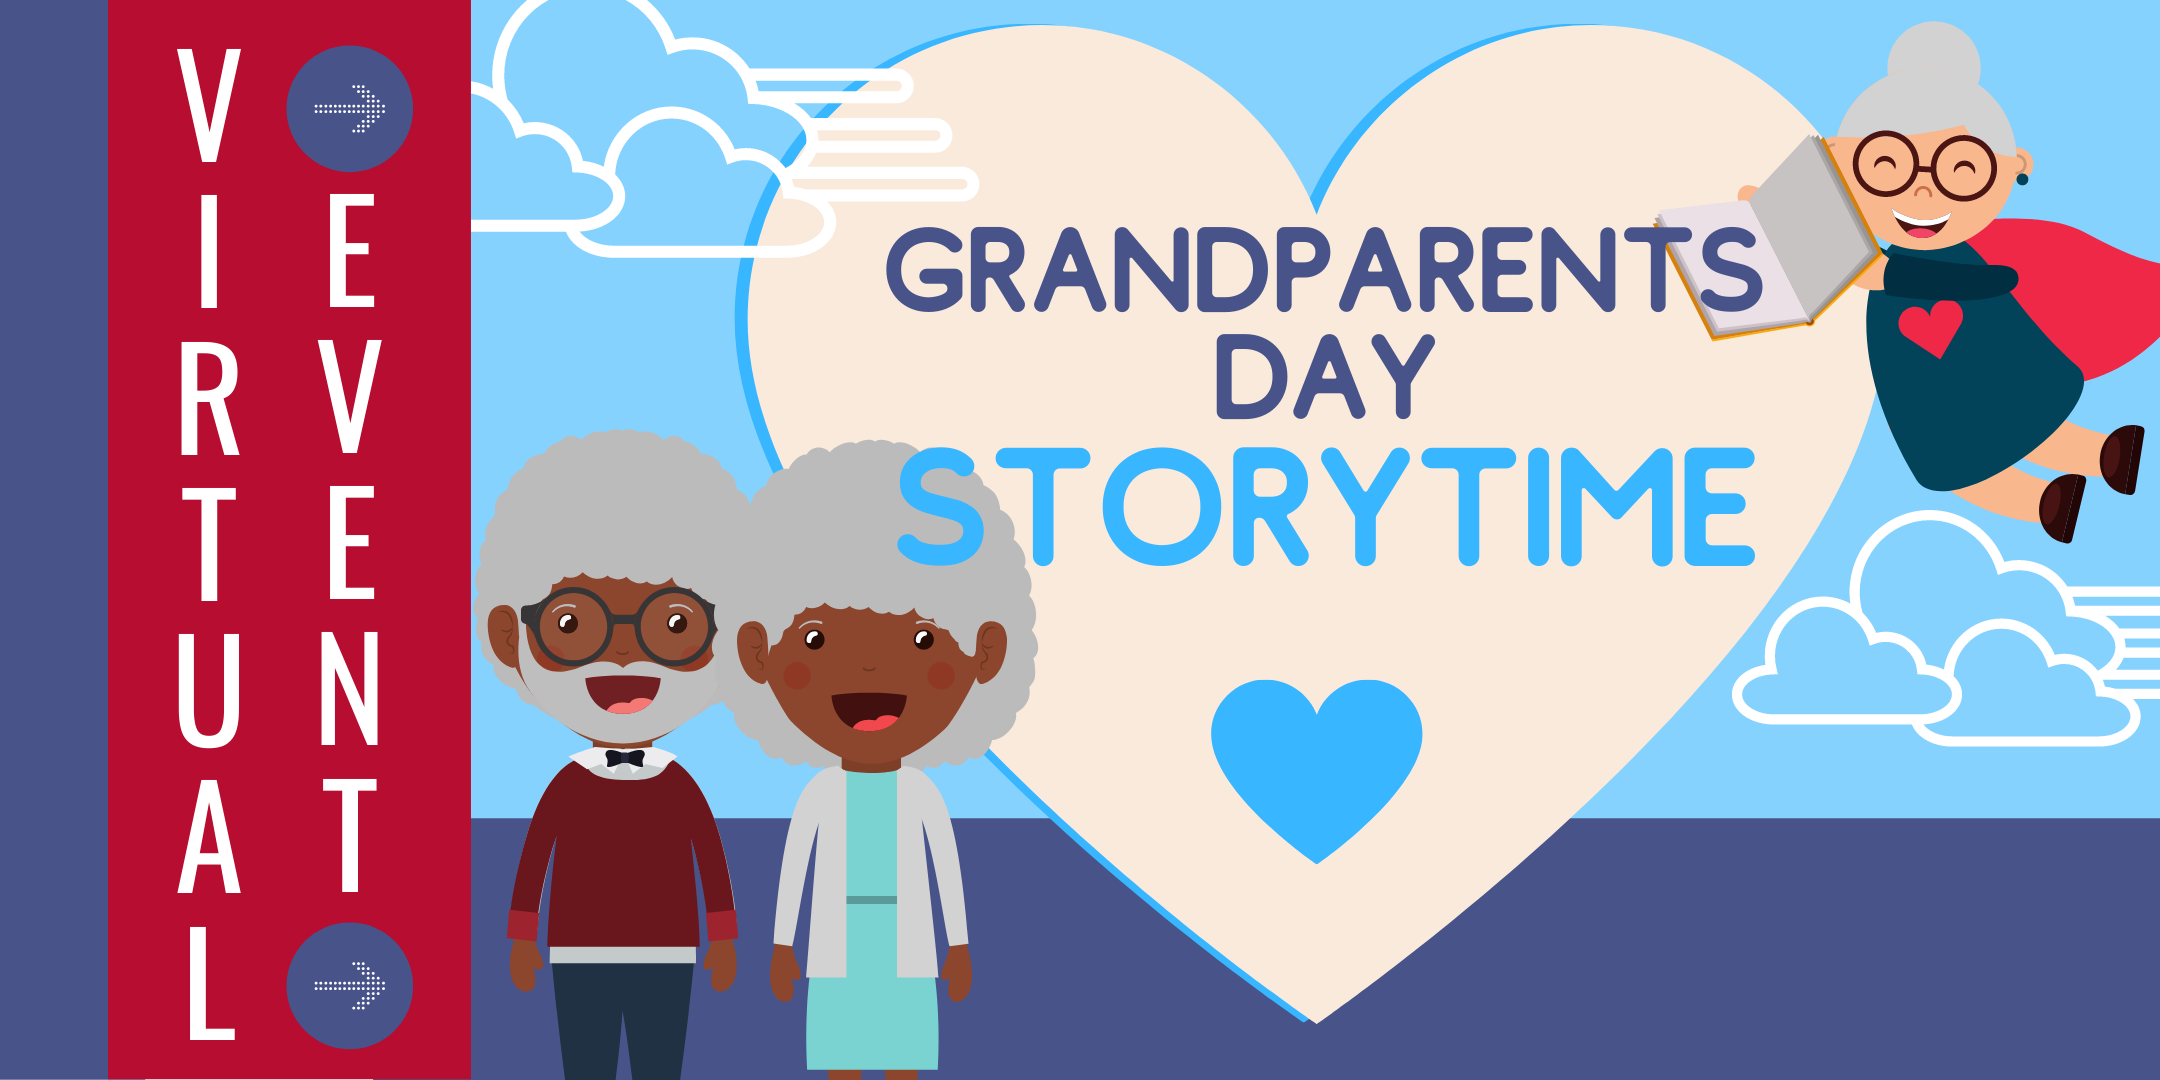 Grandparents Day Storytime image